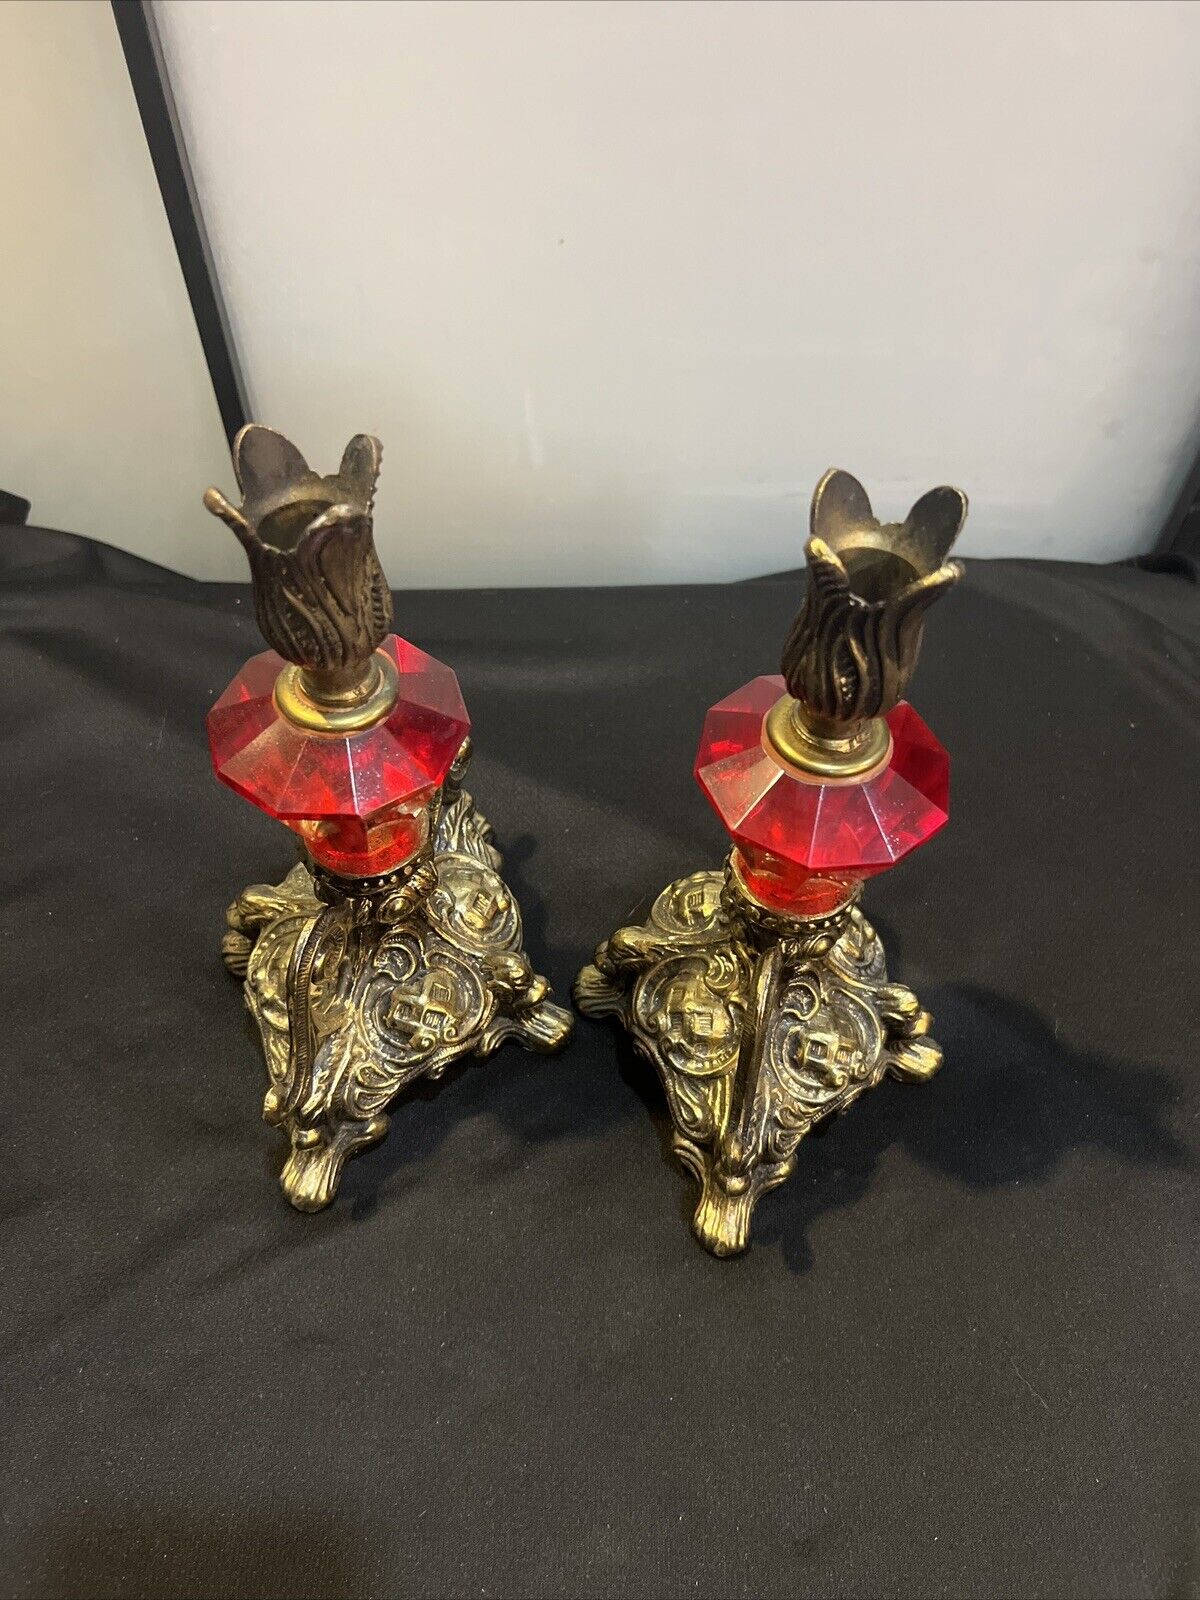 2 Vintage Hollywood Regency Style Metal RED Lucite Candlesticks Candle Holders